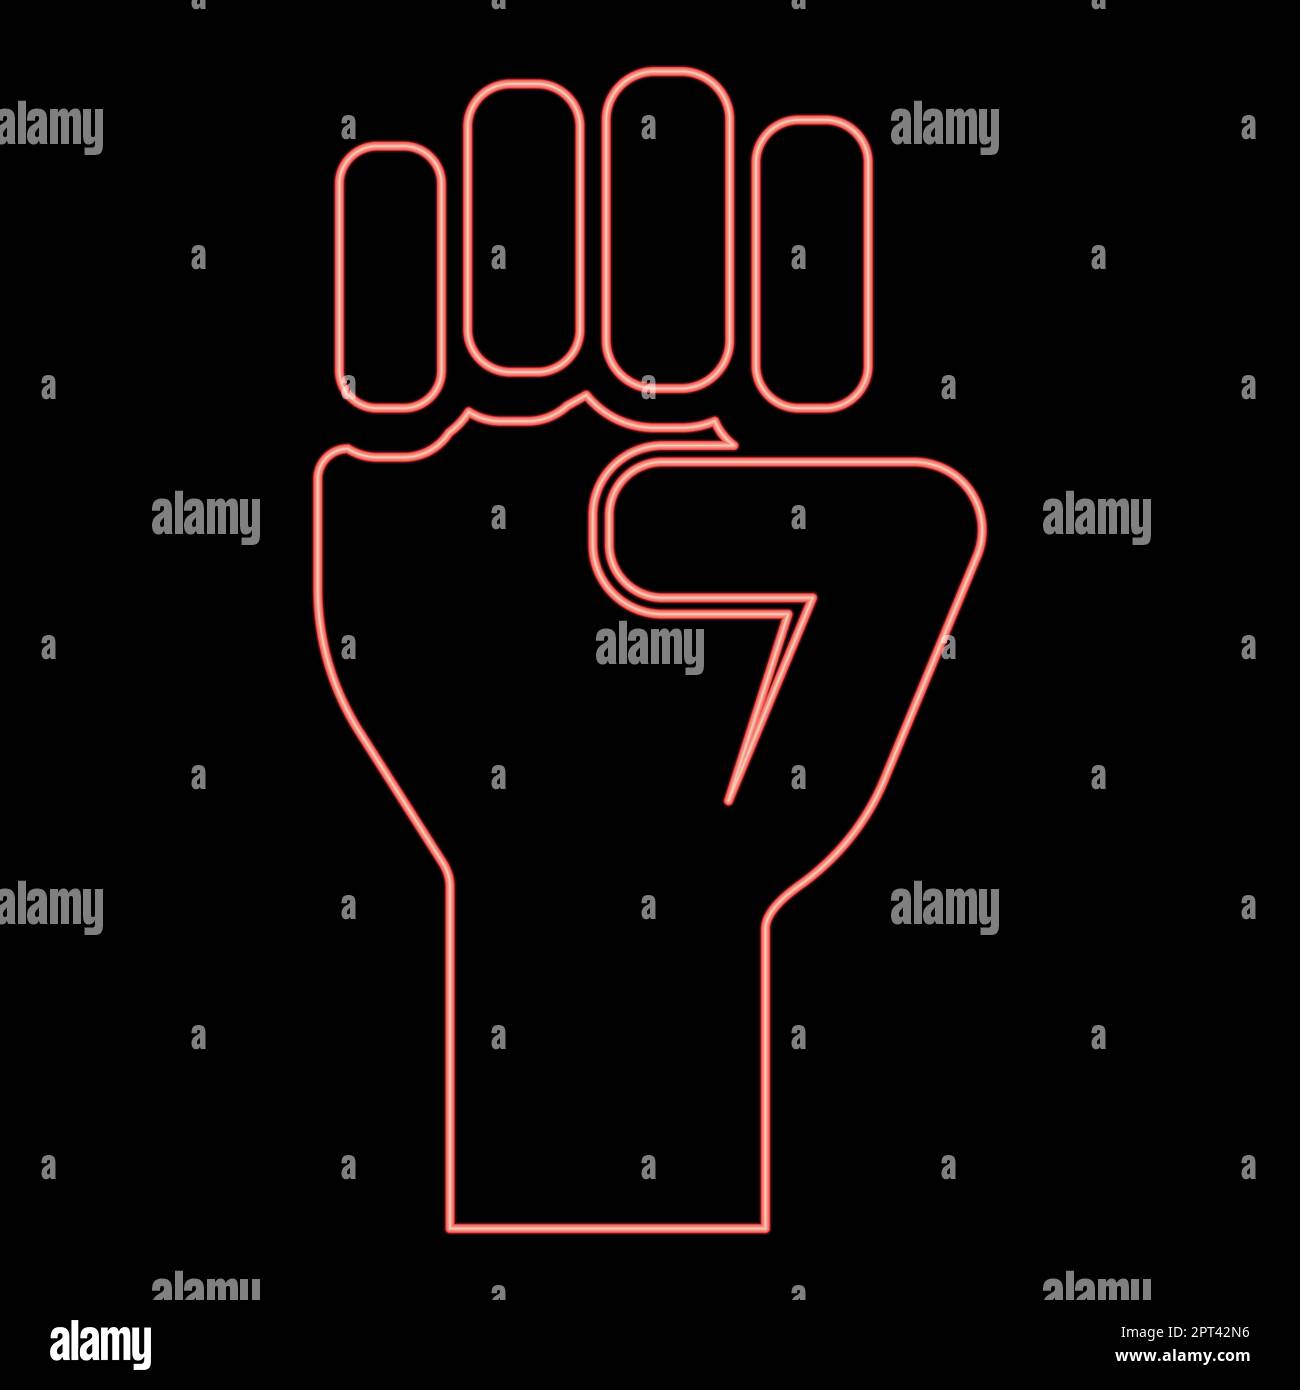 Neon fist up Concept of freedom fight revolution power protest red color vector illustration image flat style Stock Vector